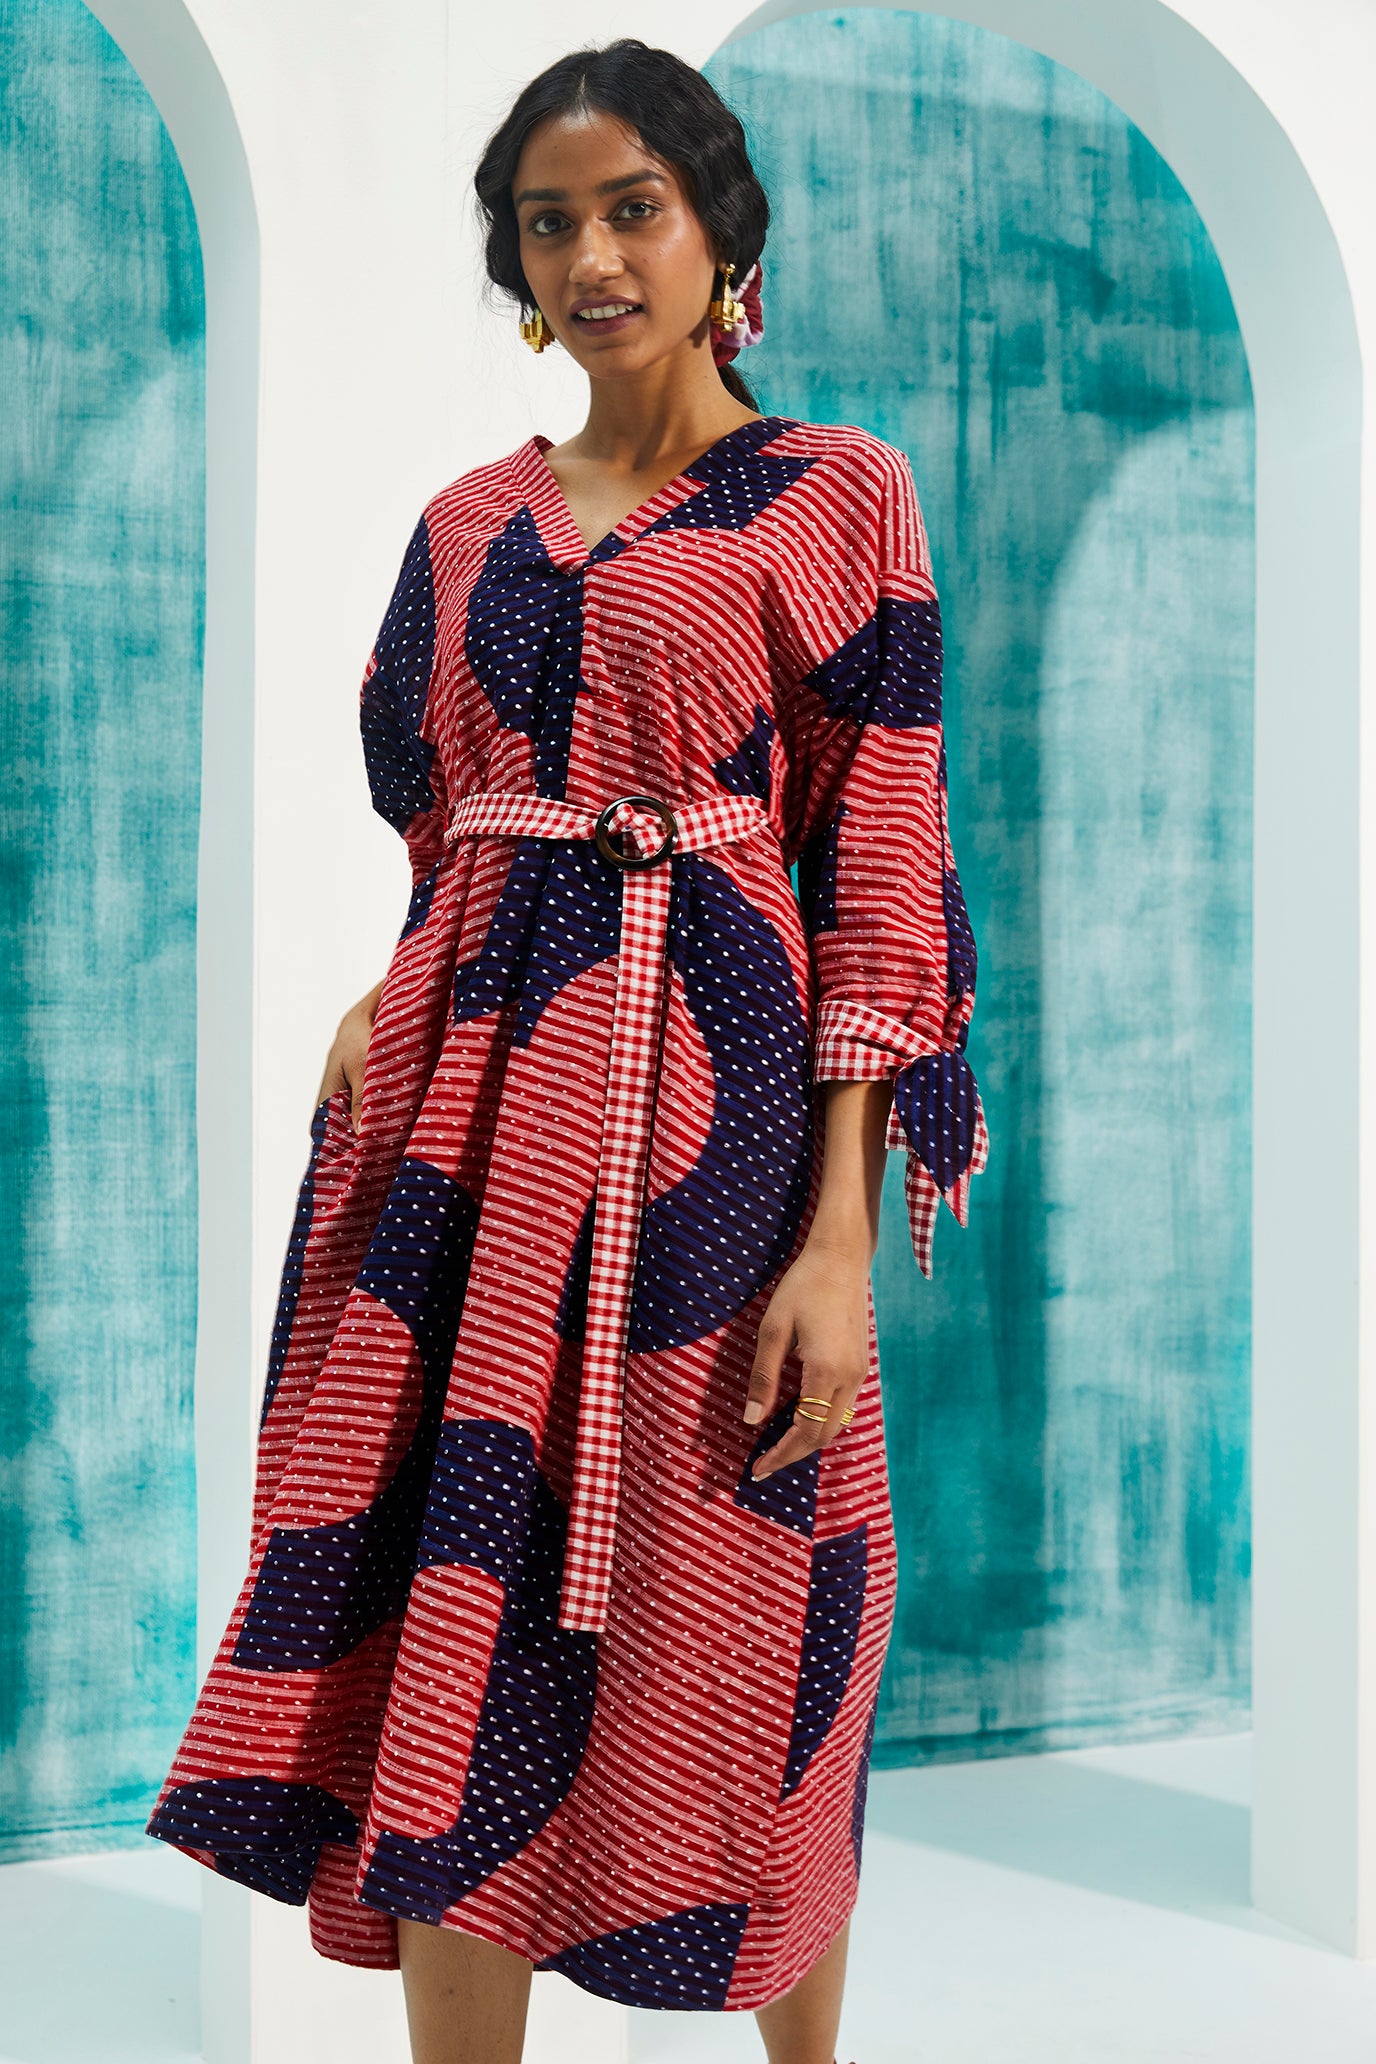 sustainable-handmade-handcrafted-jodi-thejodilife-graphic-hand-block-print-textured-cotton-red-blue-dress-relaxed-loose-fit-attached-belt-cinch-waist-complementing-gingham-checks